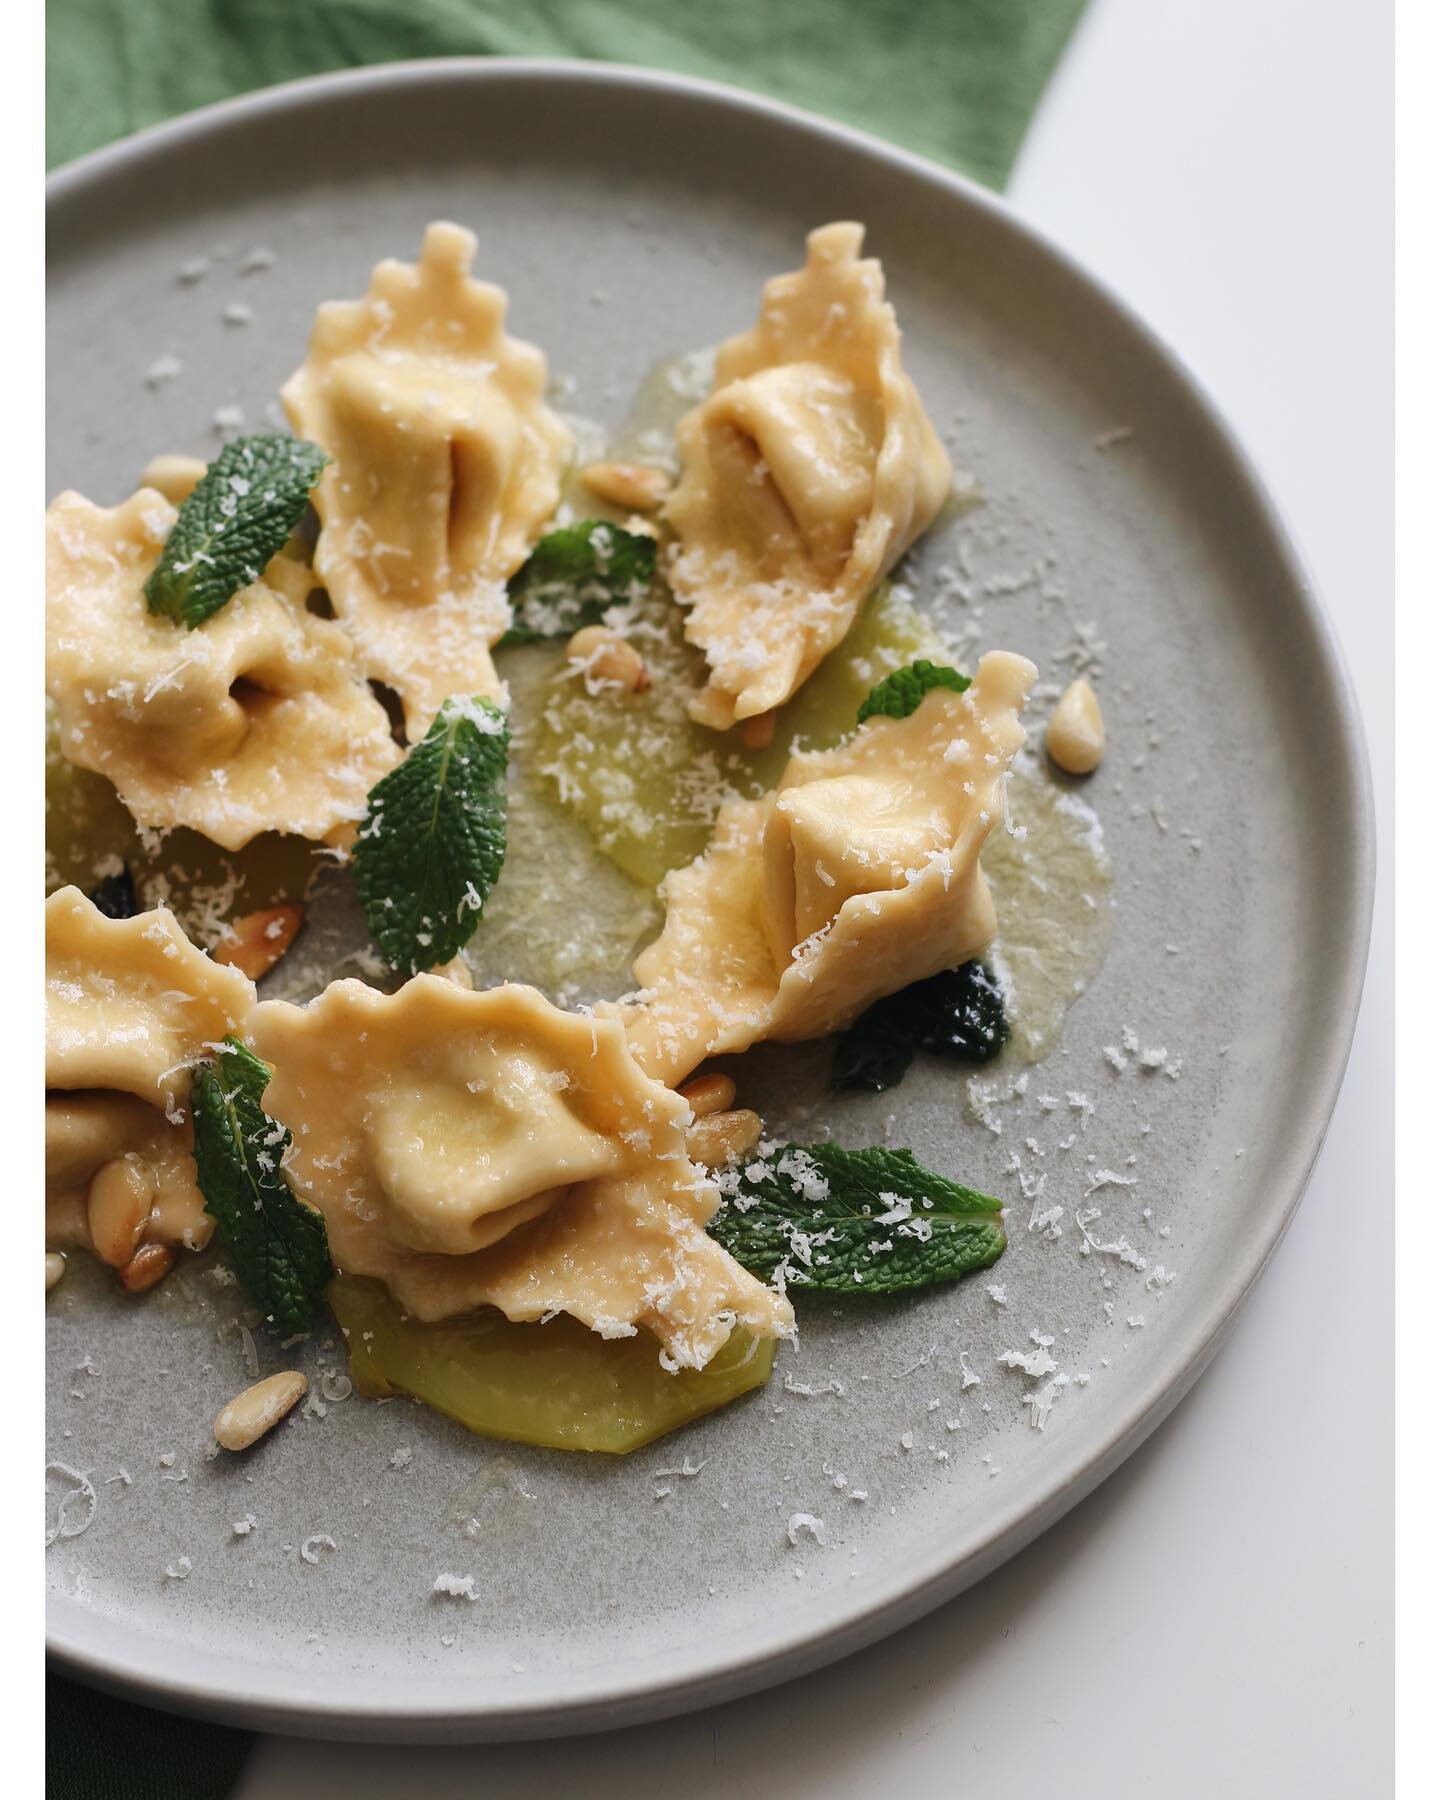 I served the cappellacci from my last post with much the same ingredients as the filling: golden beets, mint and pecorino. With the addition of toasted pine nuts and lots of butter 😋.
.
.
.
 #juliaeatsitaly #handmadepasta #pastalover #freshpasta #pa